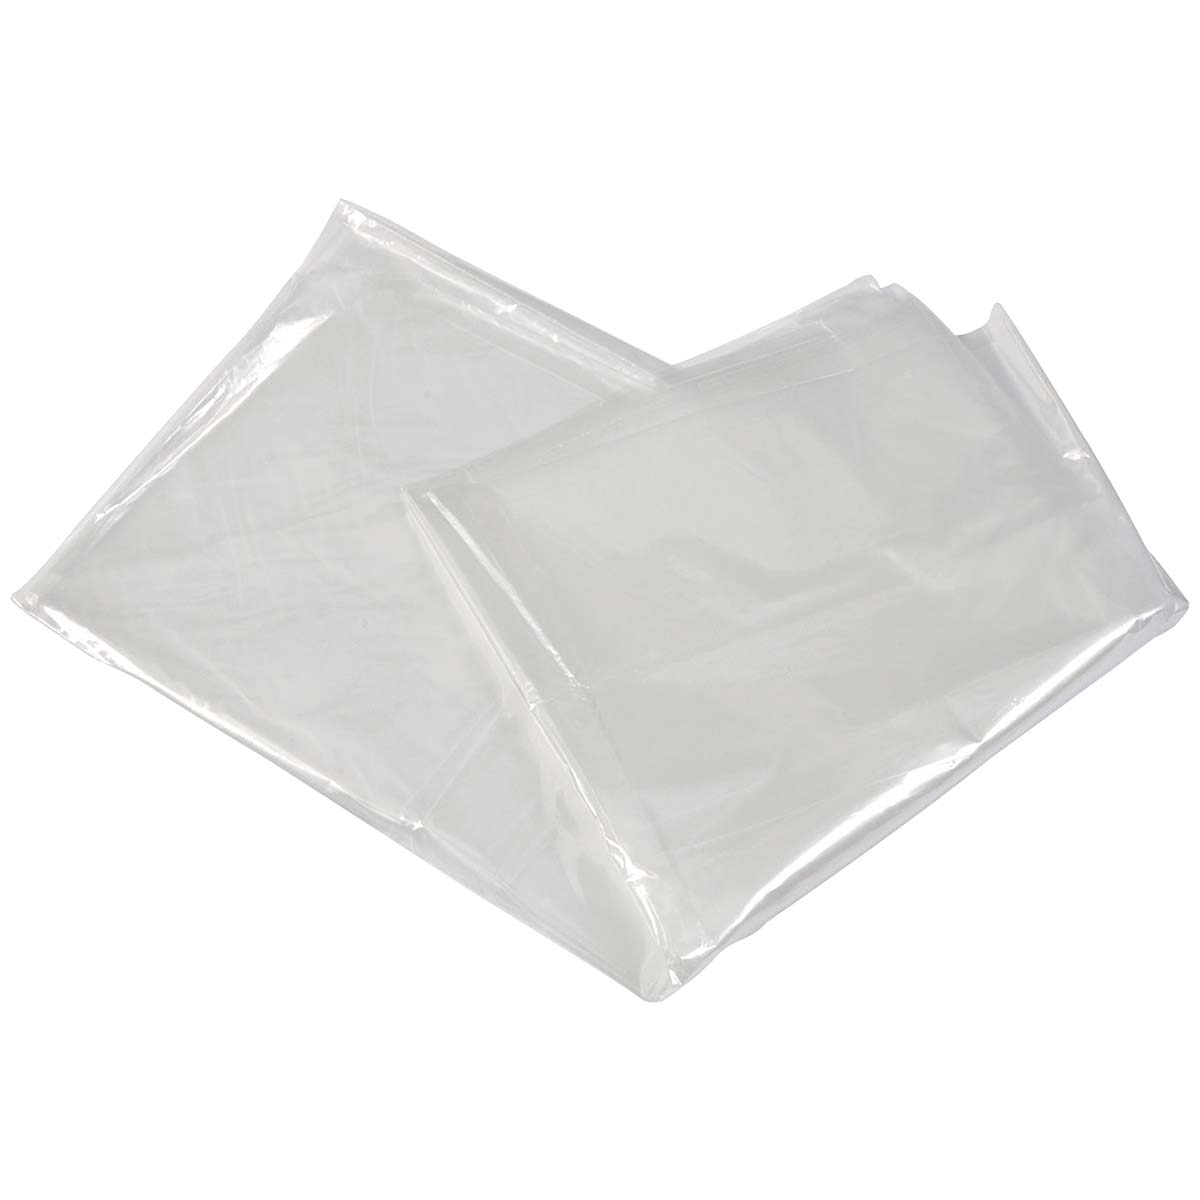 4215806 "A strong and thicker ground sail. This keeps the tent's ground sail clean and condensation of moisture is also prevented. Made from 0.03 millimetre 'low density polyethylene' (LDPE). Contains no plasticizers so the coating of the ground sail is not affected."